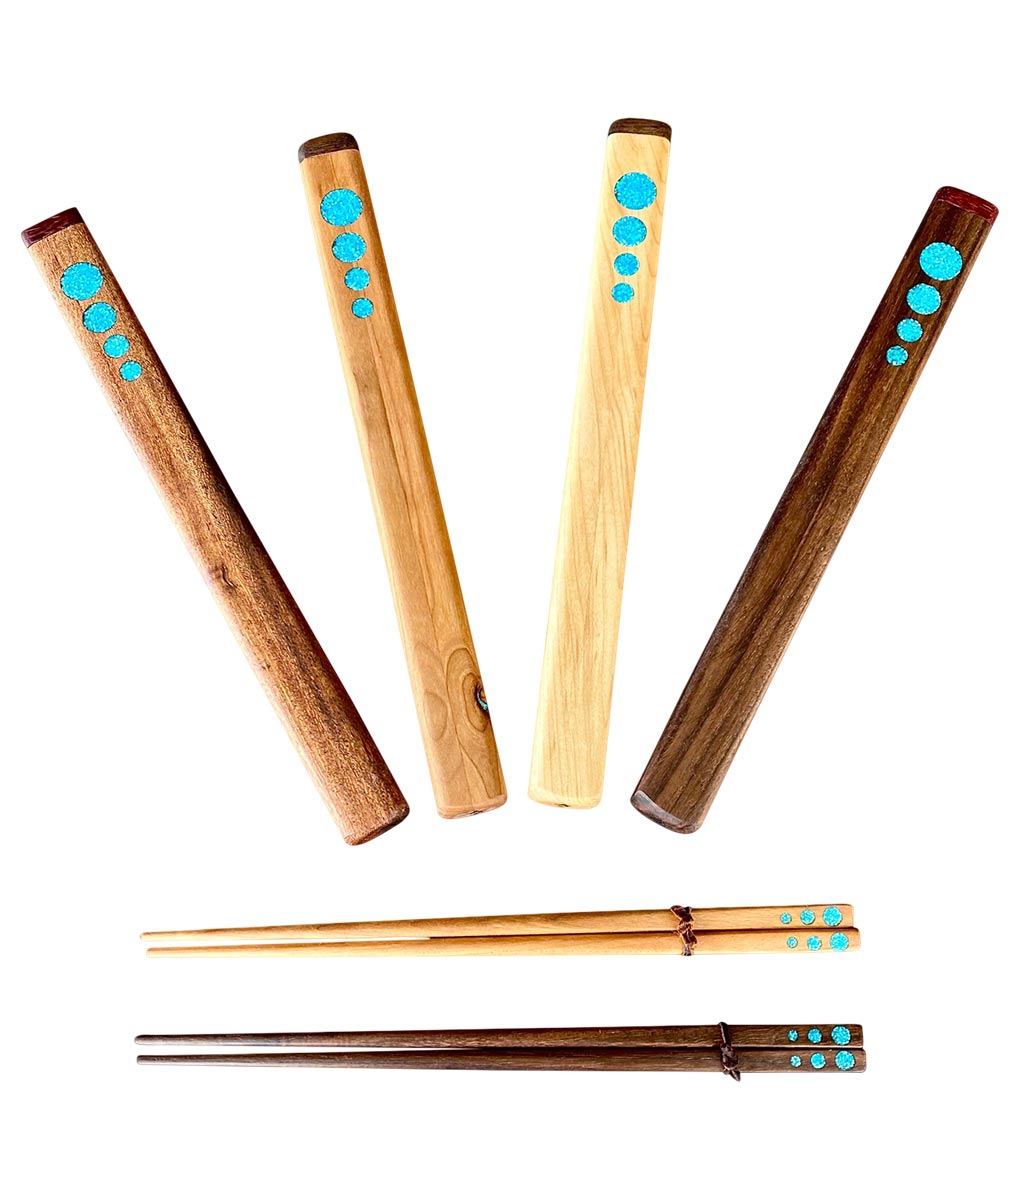 Wood Chop Sticks and Box with Inlaid Turquoise